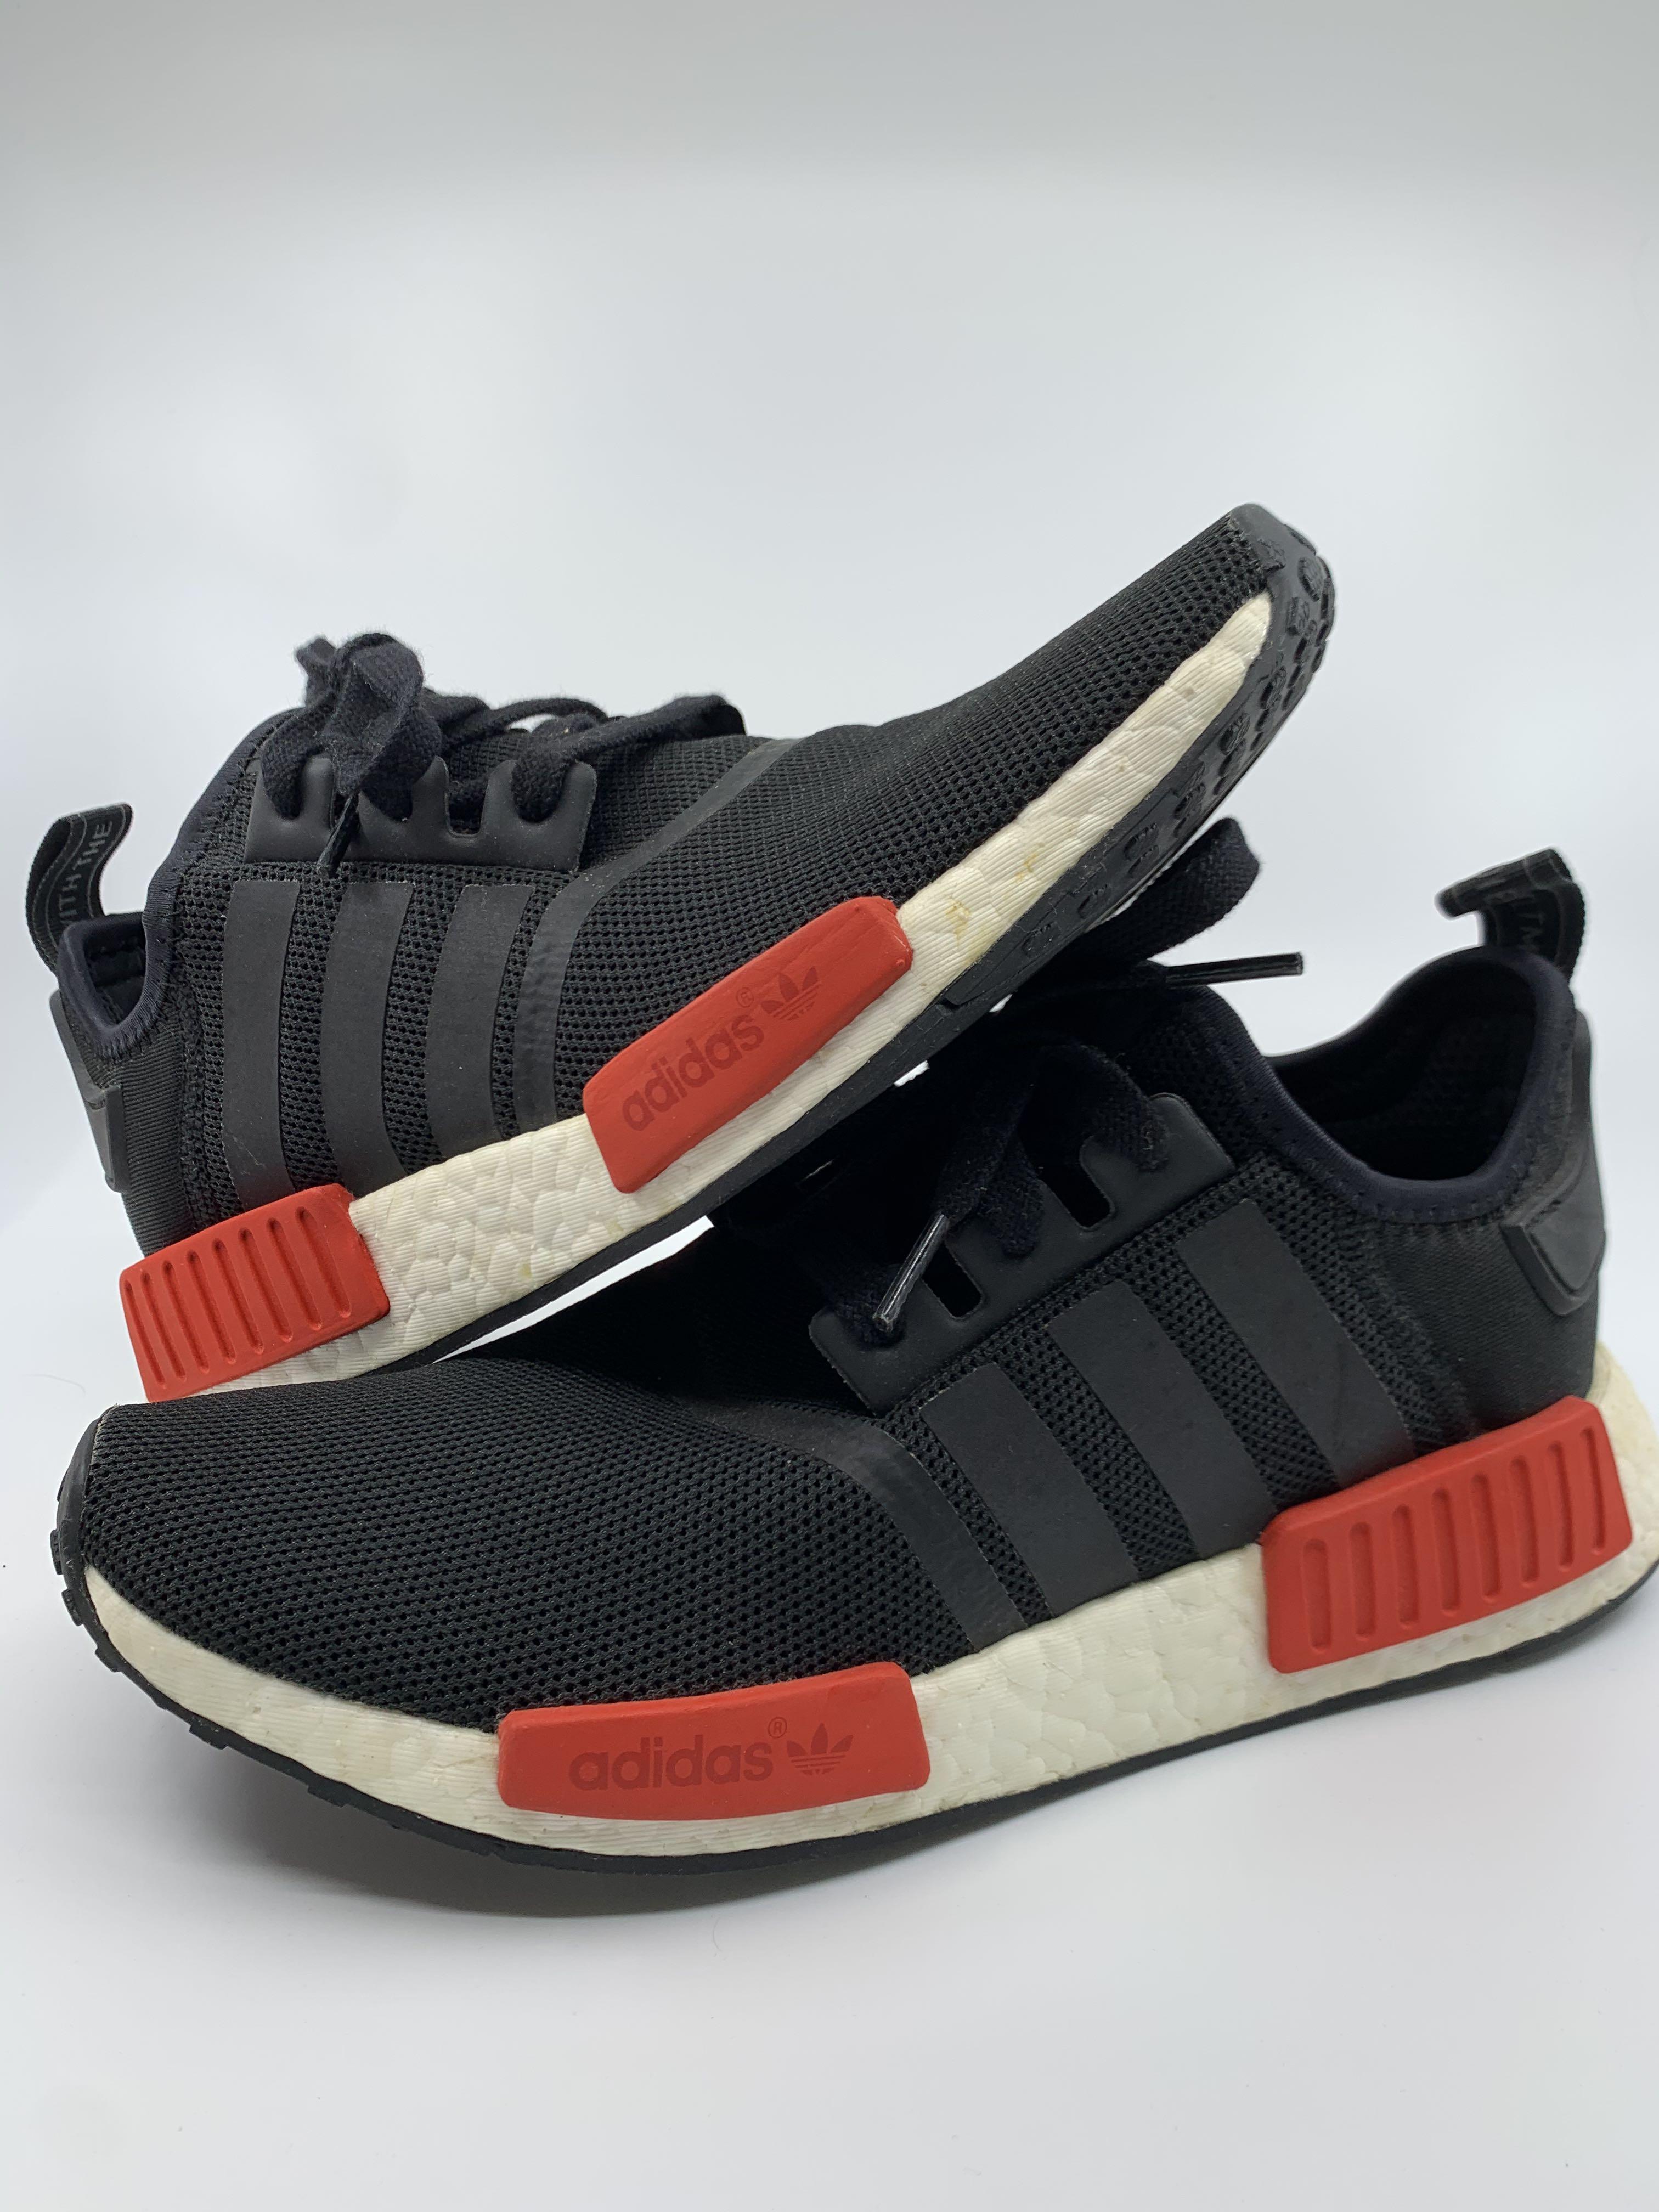 Descompostura bloquear helicóptero Adidas NMD R1 Black Red Boost The Brand With Three 3 Stripes, Men's  Fashion, Footwear, Sneakers on Carousell